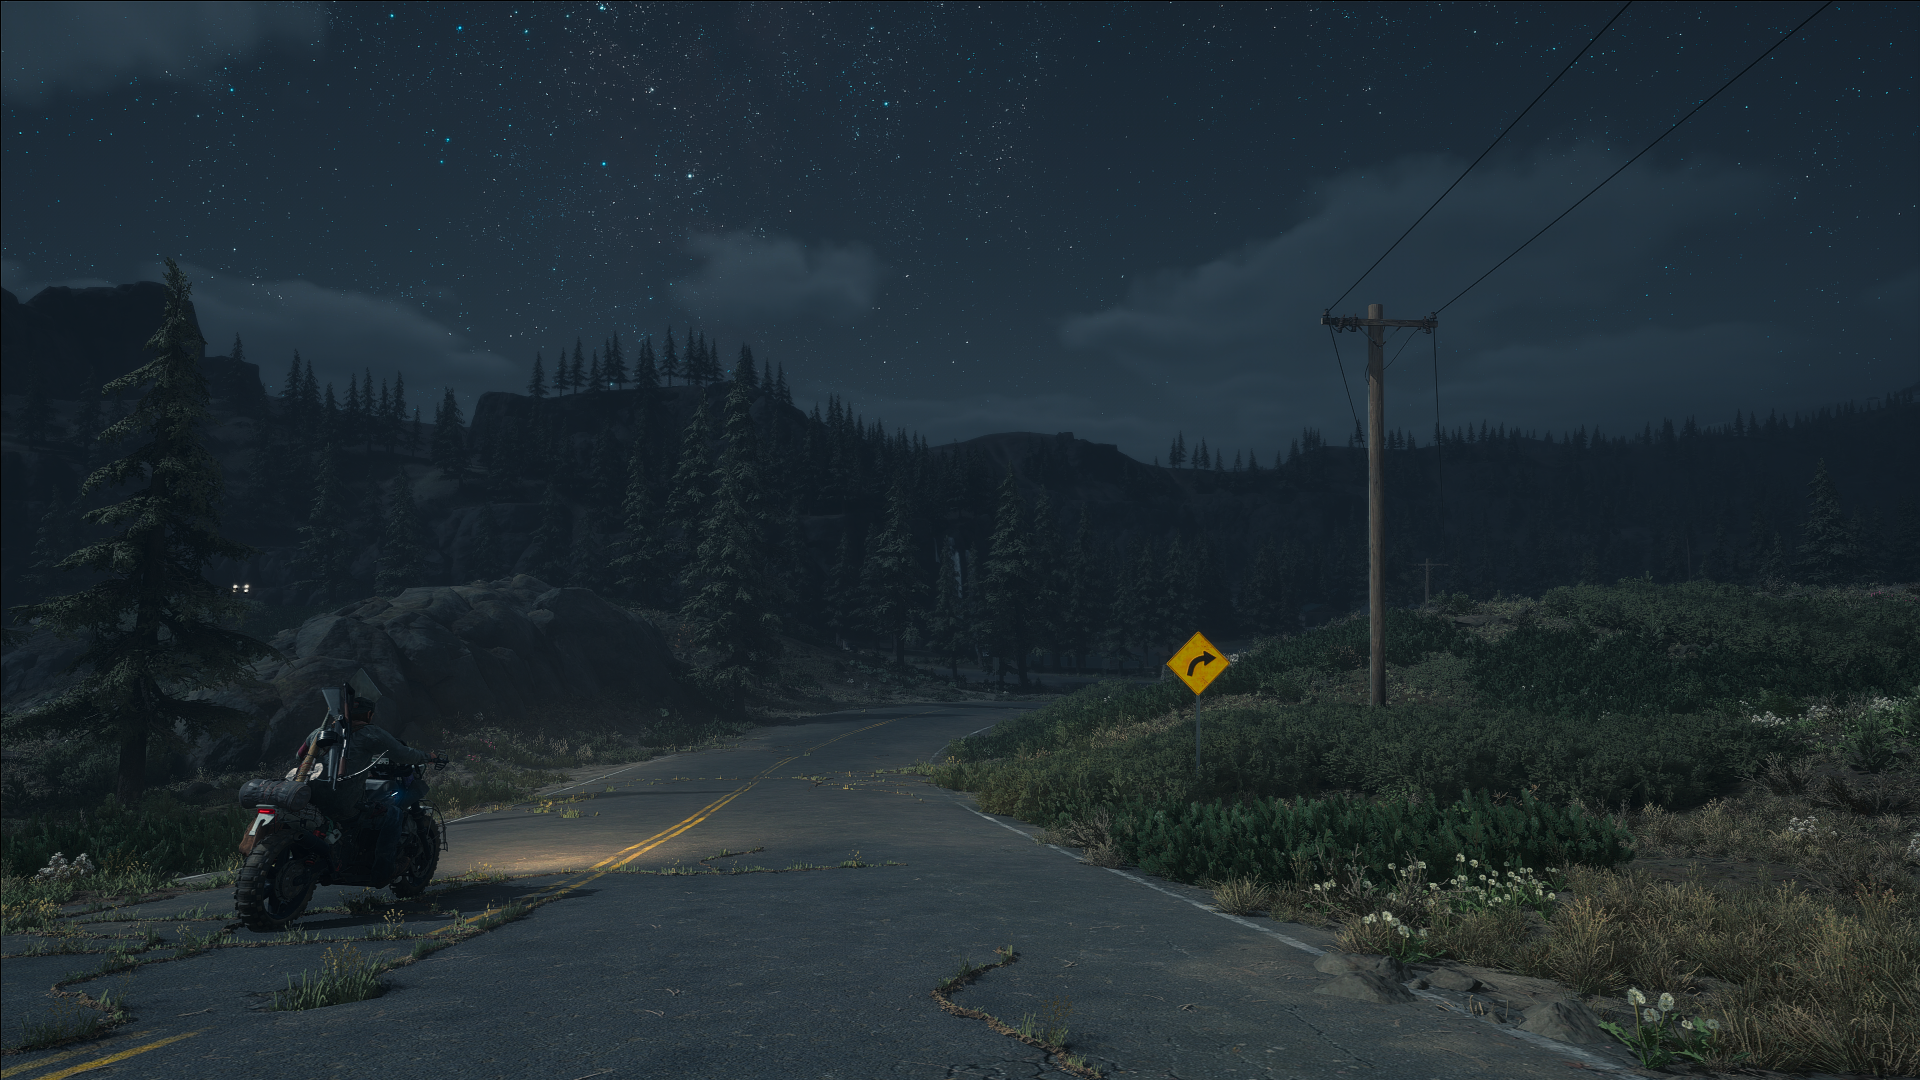 General 1920x1080 Days Gone screen shot sign Deacon St John video games headlights motorcycle trees video game art night sky stars road video game characters CGI gun boys with guns flowers vehicle video game men